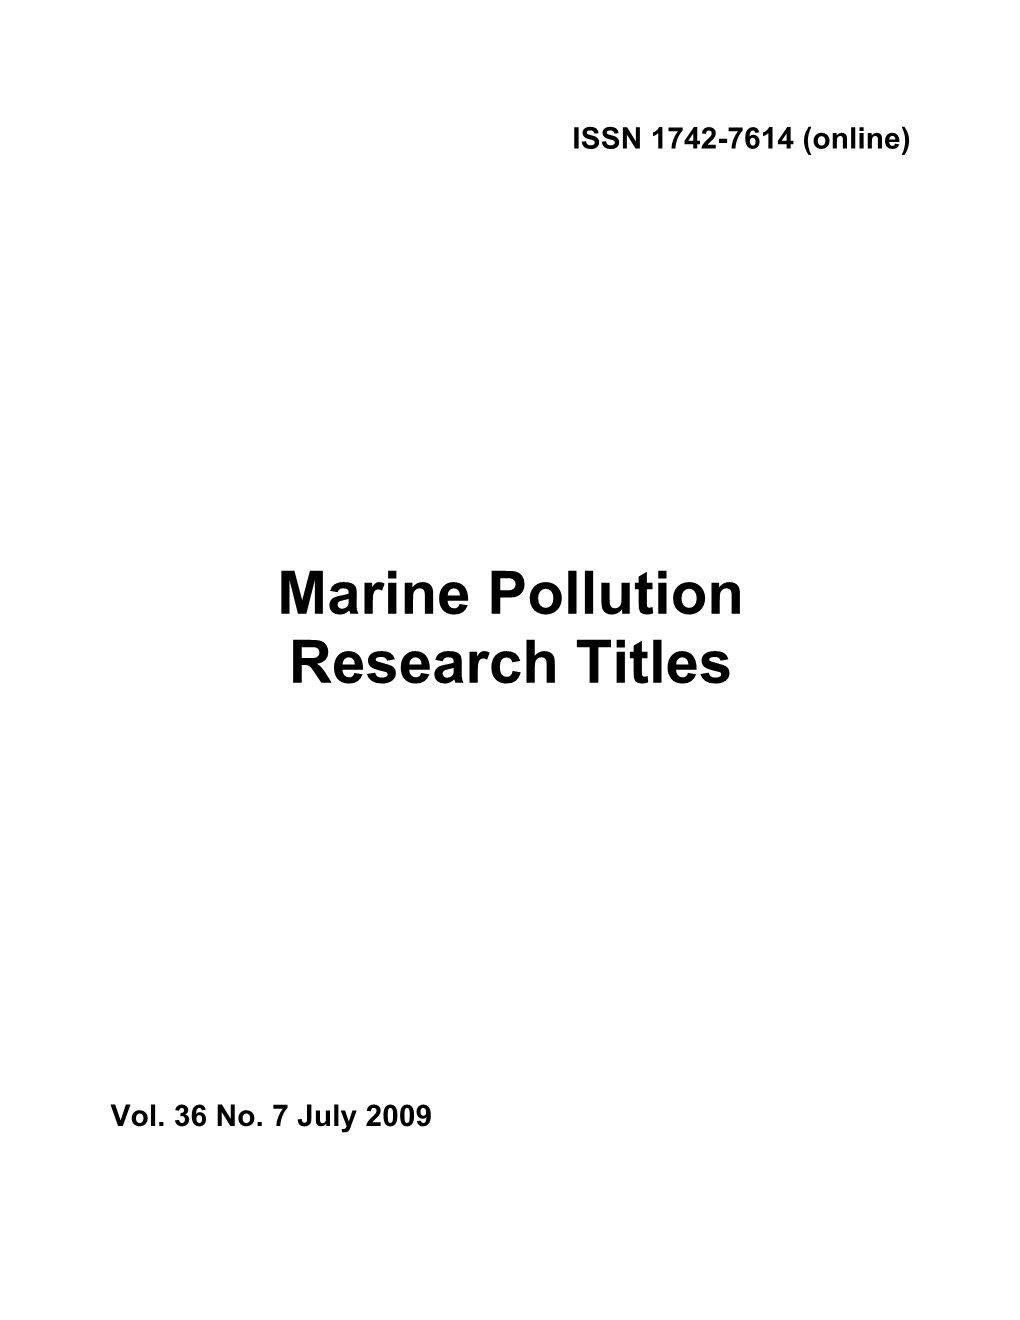 Marine Pollution Research Titles